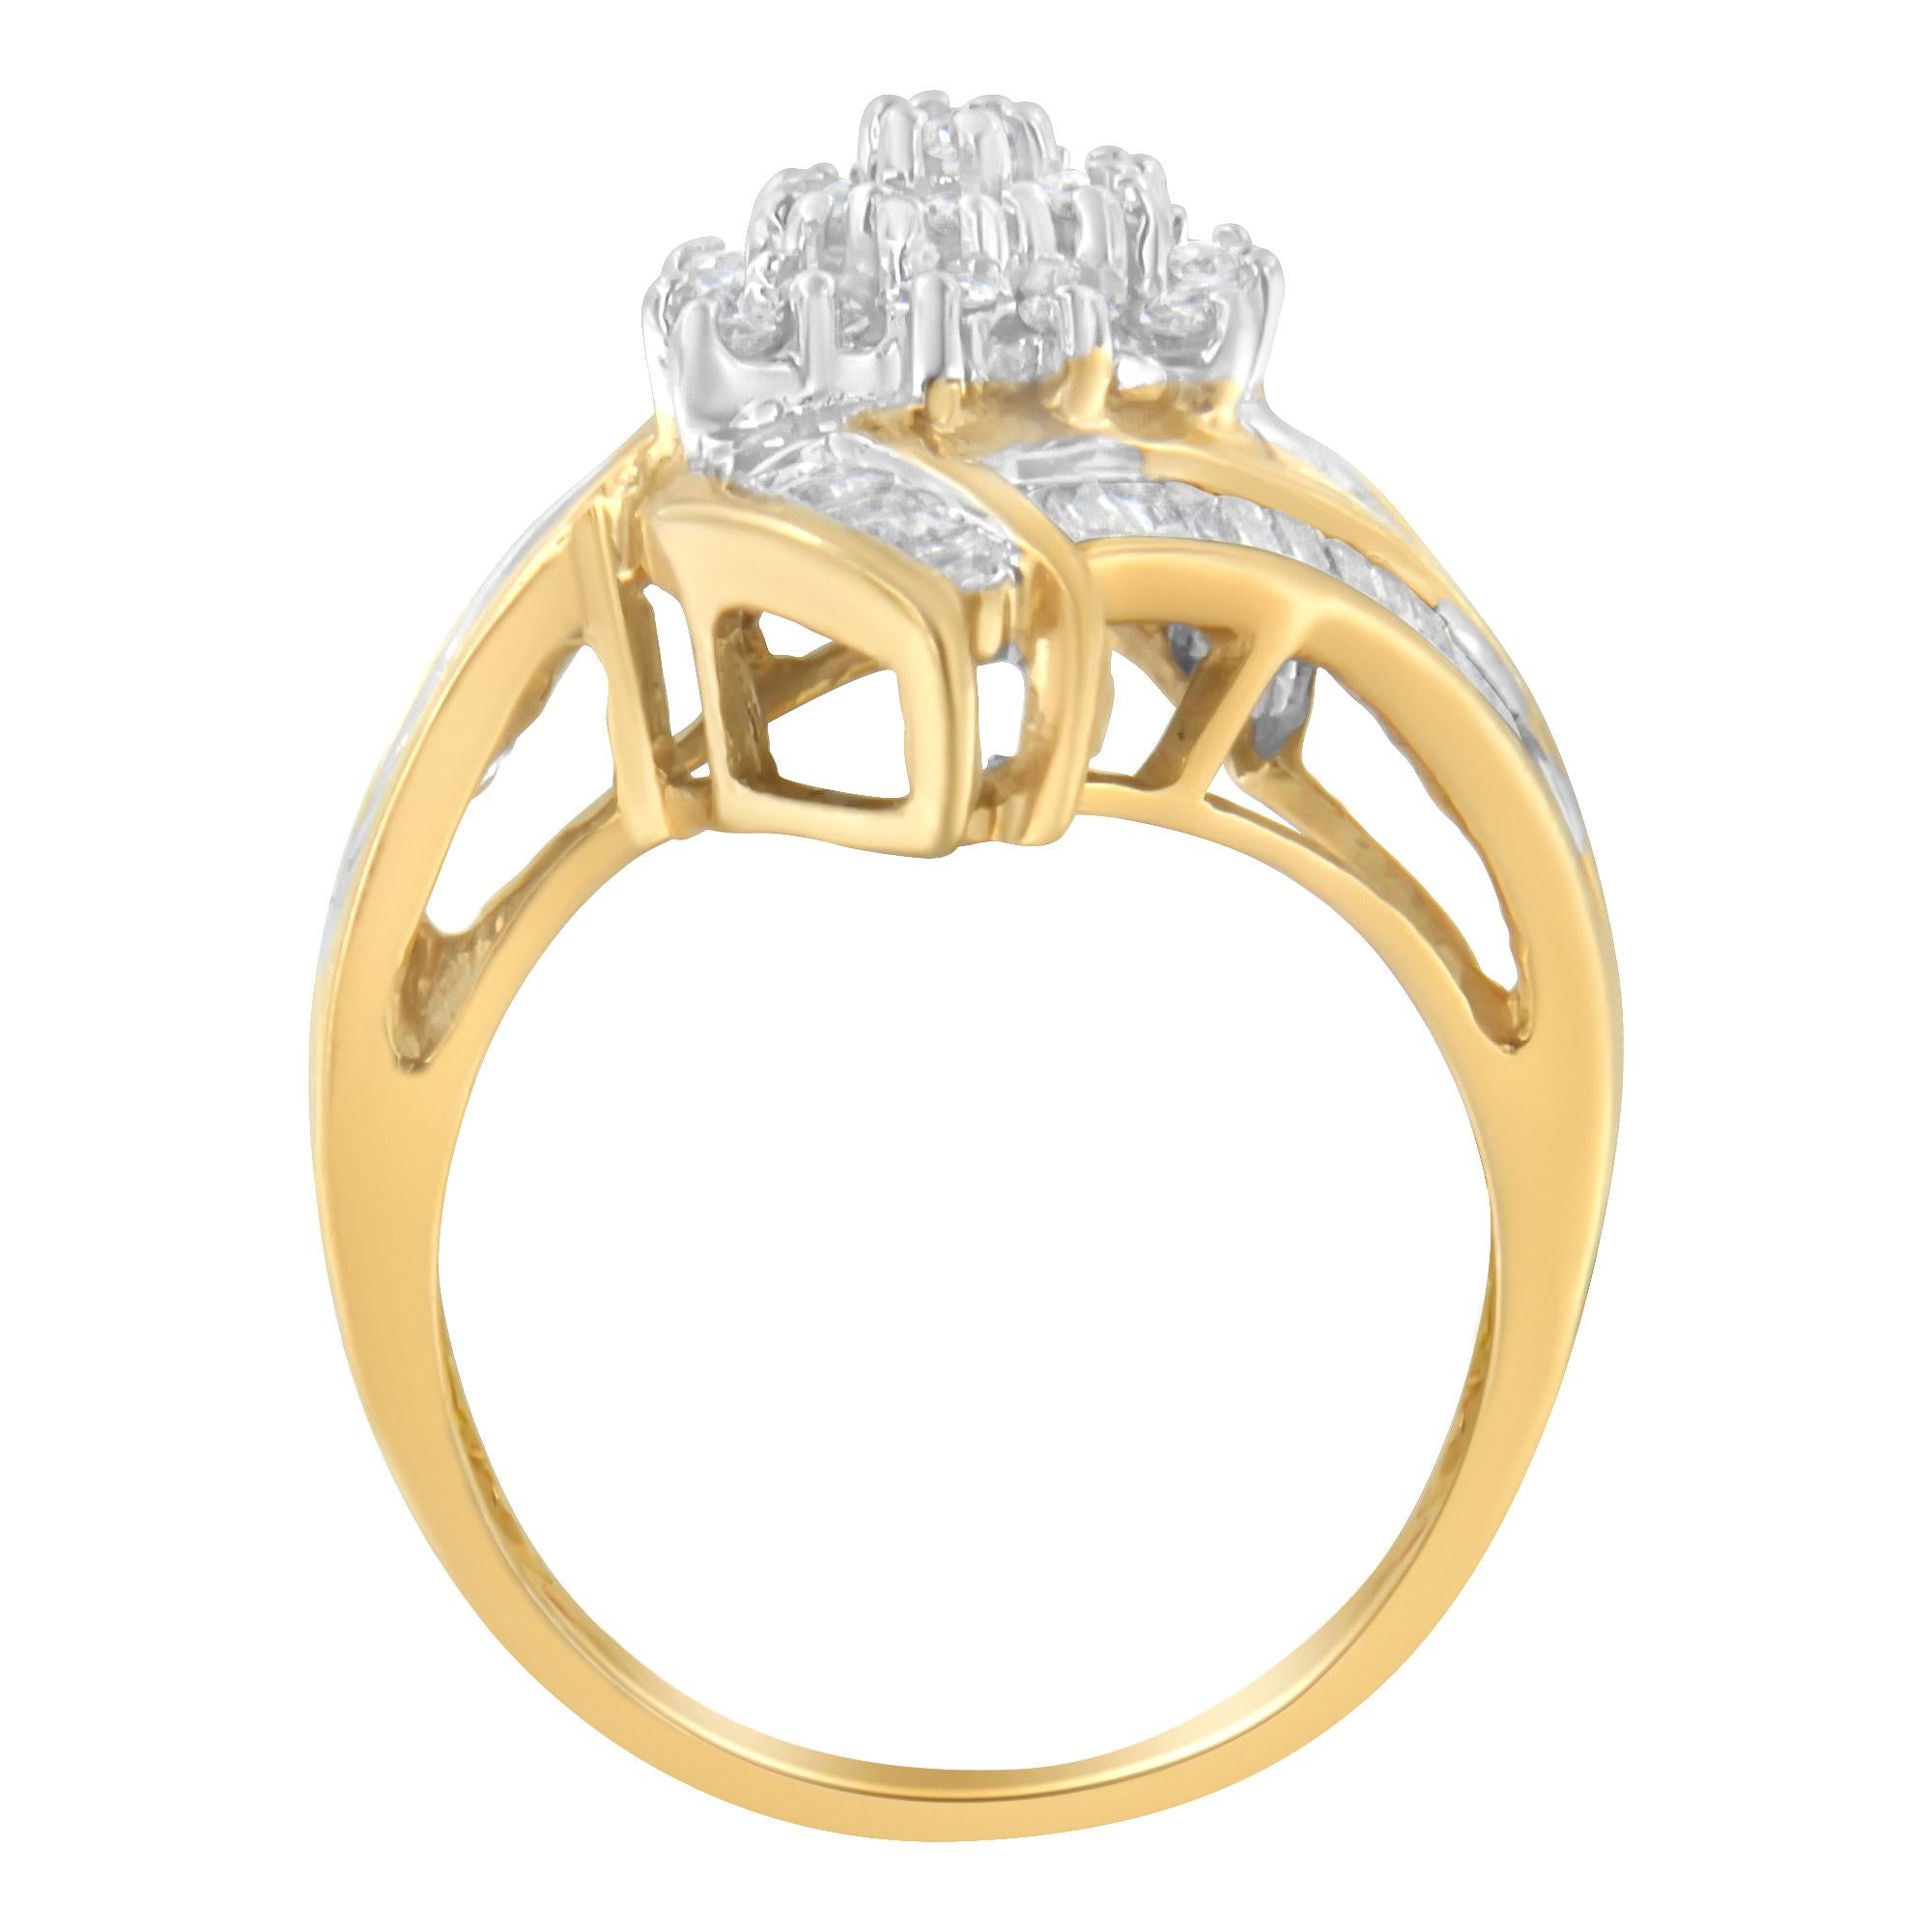 Enjoy this beautiful diamond 10 karat yellow gold ring. Featuring a central cluster of round brilliant cut diamonds that are surrounded by rows of baguettes to form a by-pass design, this elegant ring is a striking choice for your loved one. It has